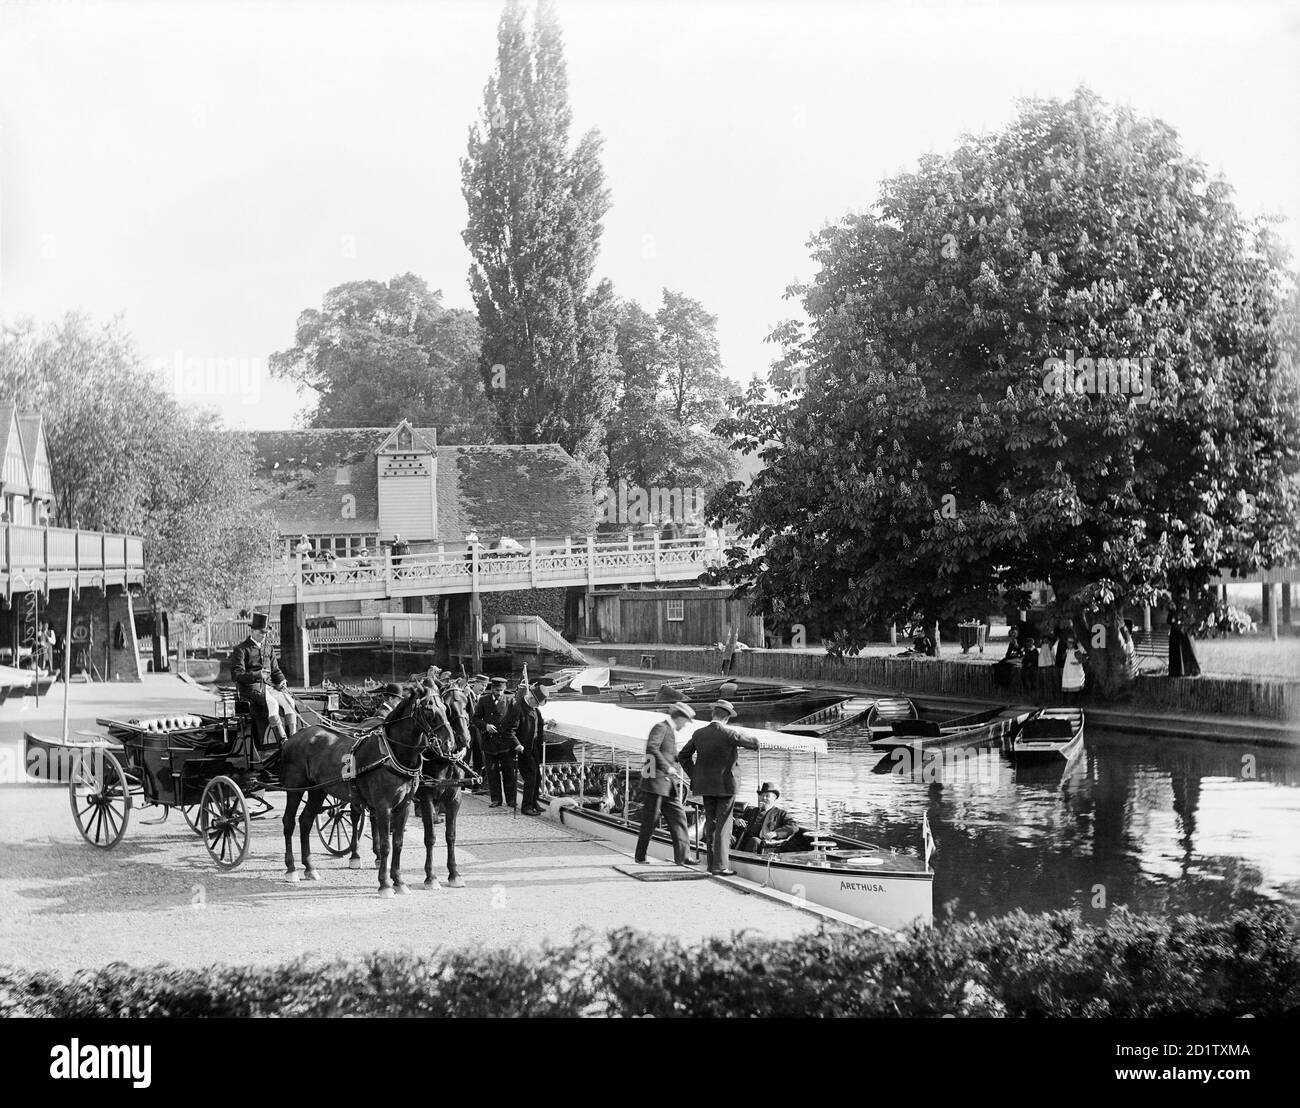 GORING, Oxfordshire. Edward, Prince of Wales sitting on the river boat 'Arethusa', moored along the banks of the River Thames, whilst other members of his party board. Photographed by Henry Taunt between 1860 and 1901. Stock Photo